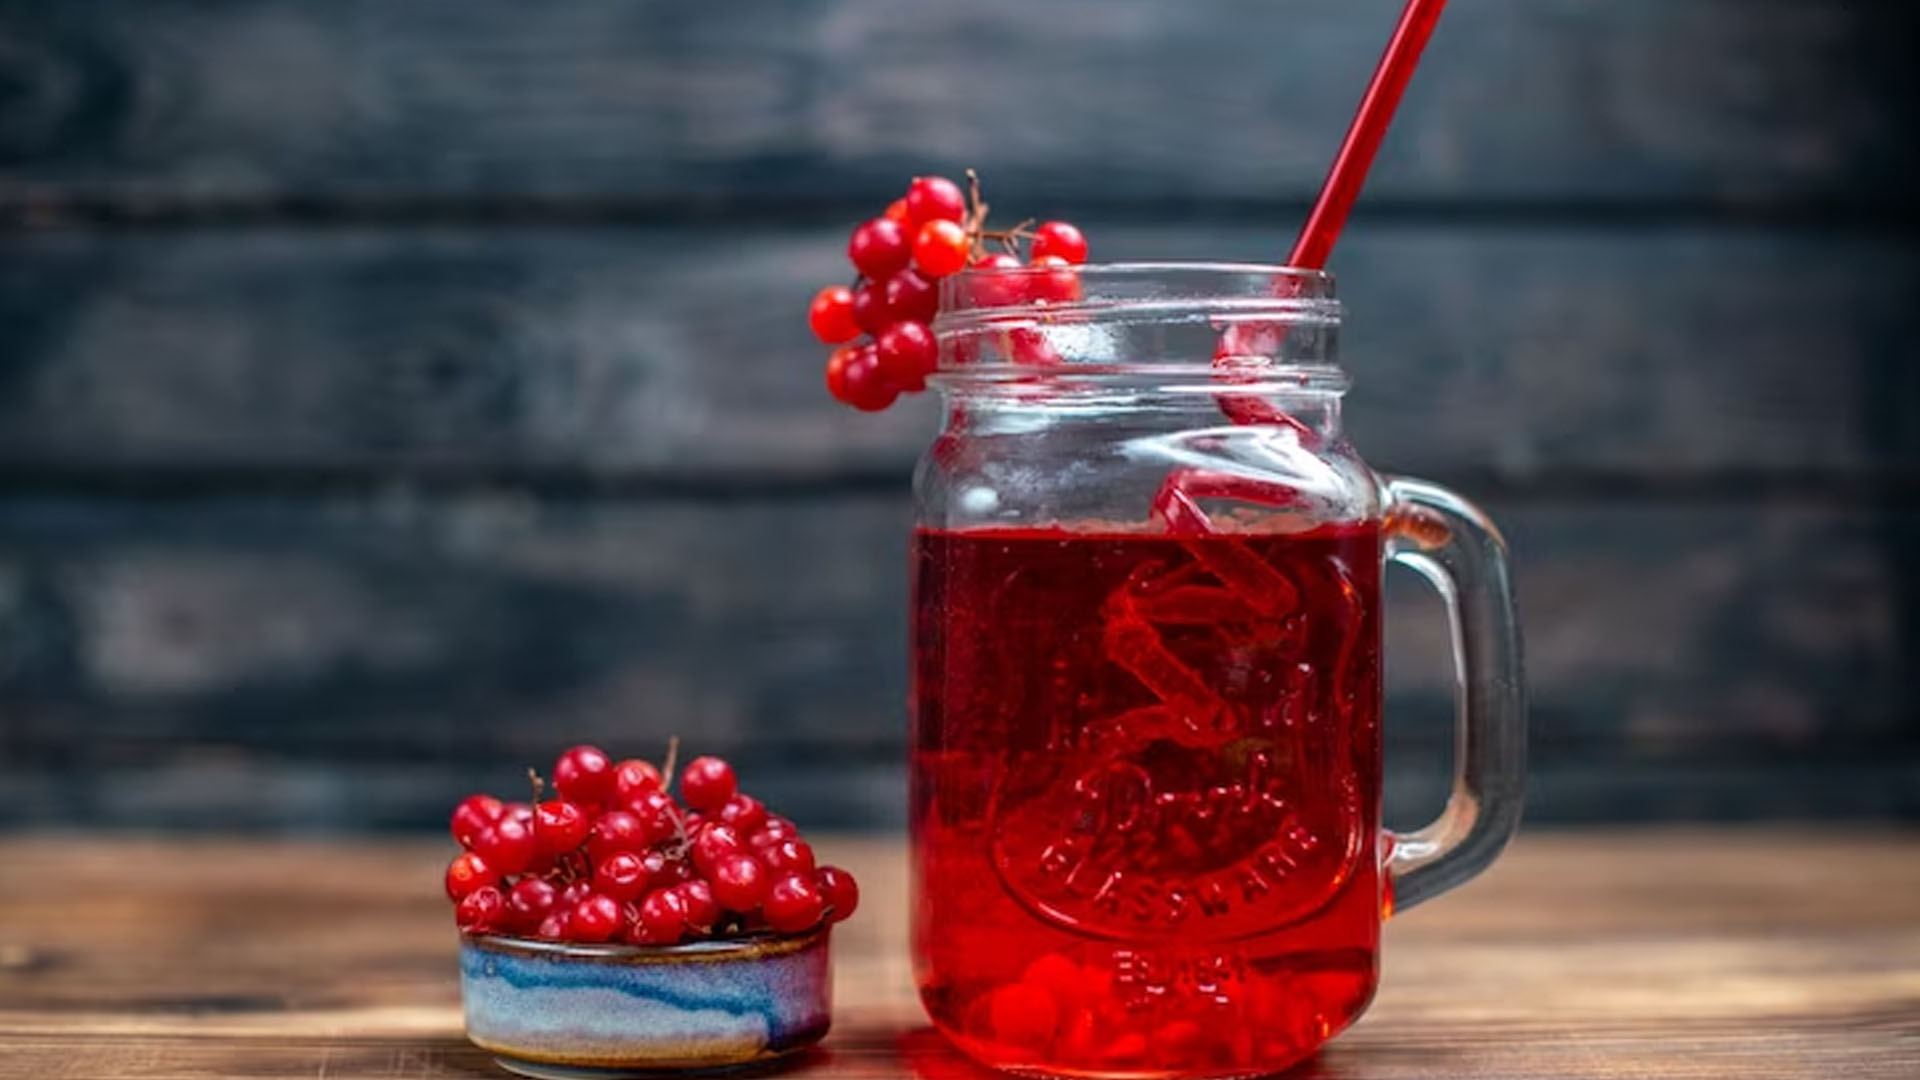 What Are The Health Benefits of Drinking Cranberry Juice?